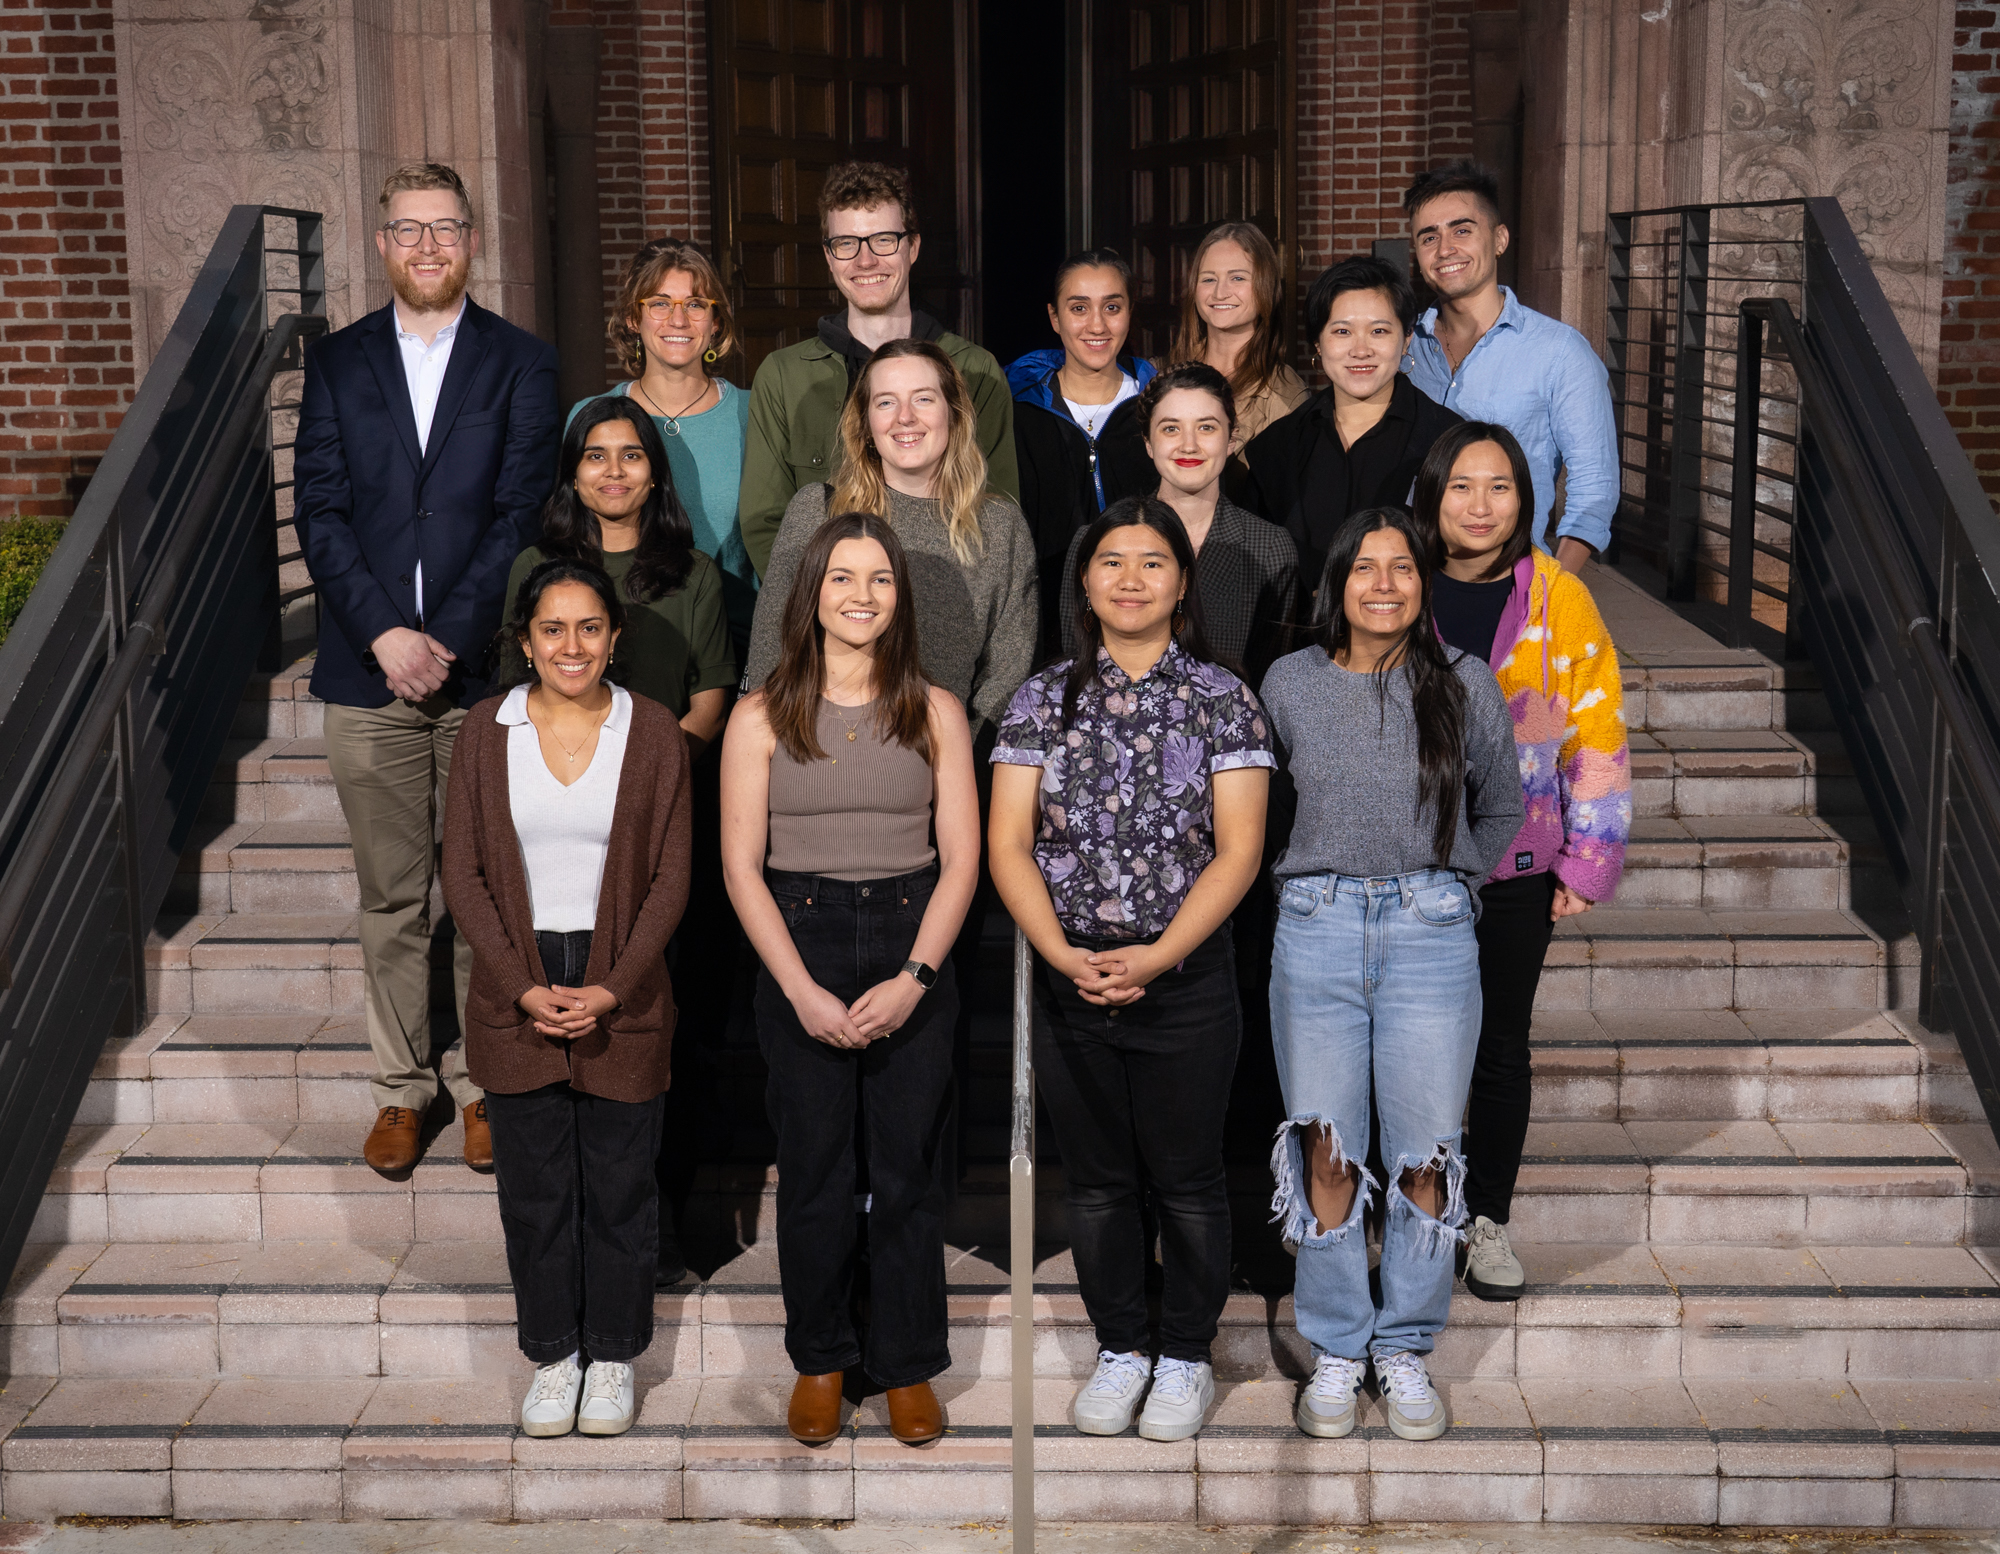 a diverse group of 15 smiling graduate students stand together on the concrete steps of a brick building